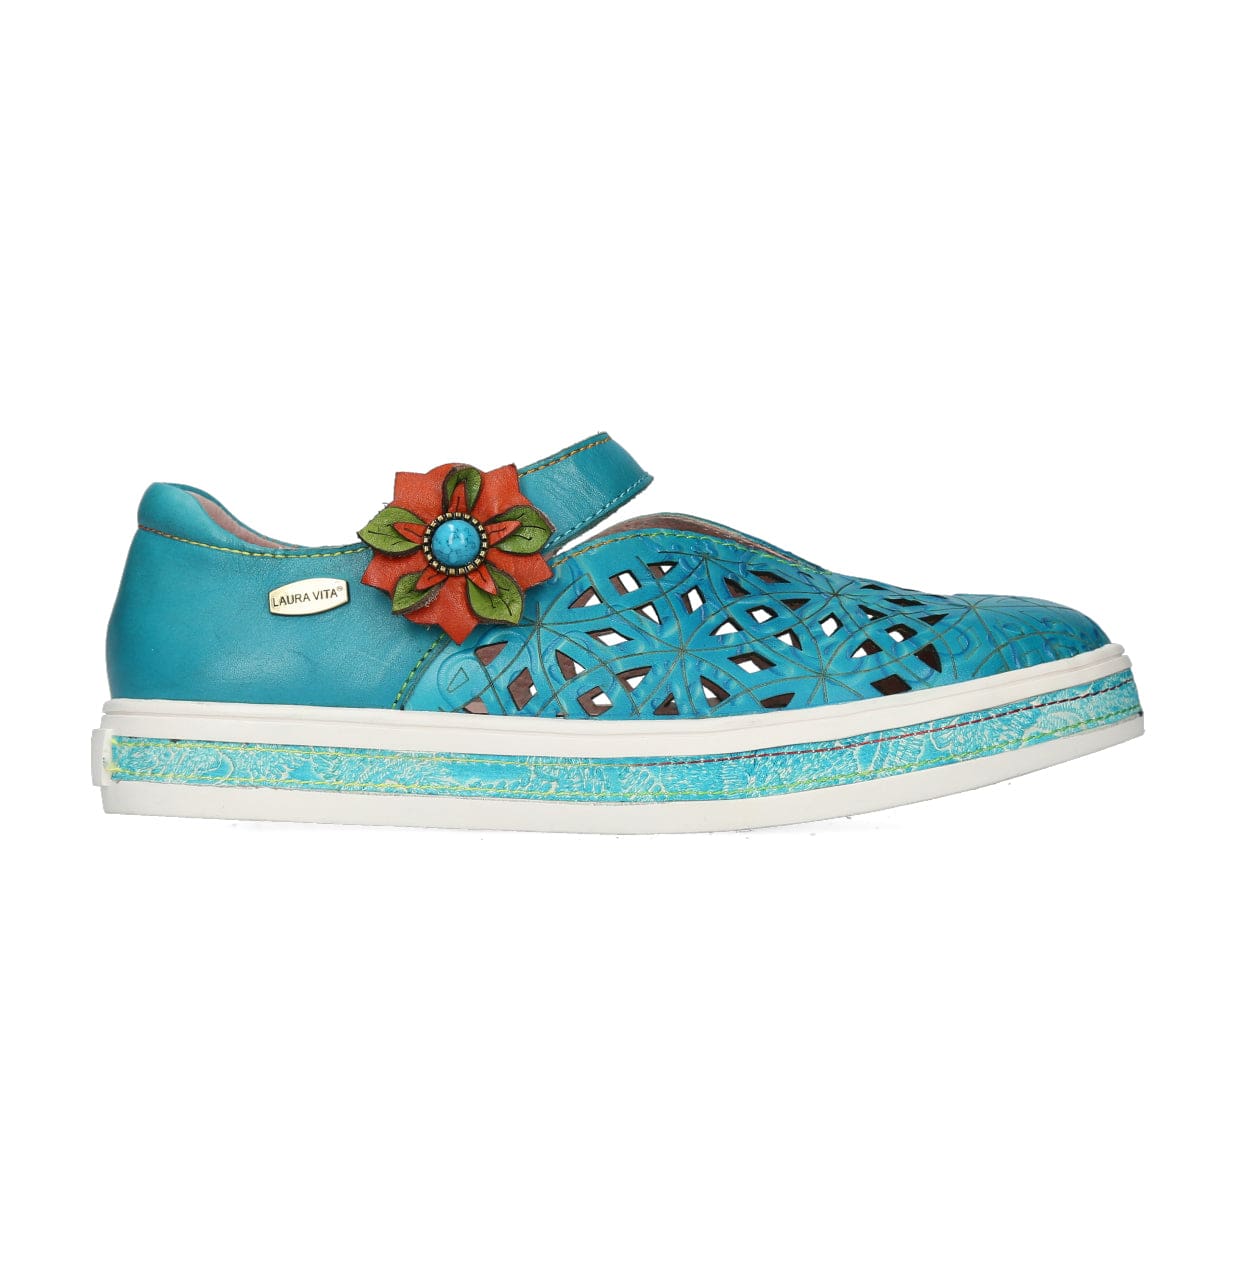 Chaussures BUENO 33 - 35 / Turquoise - Sport